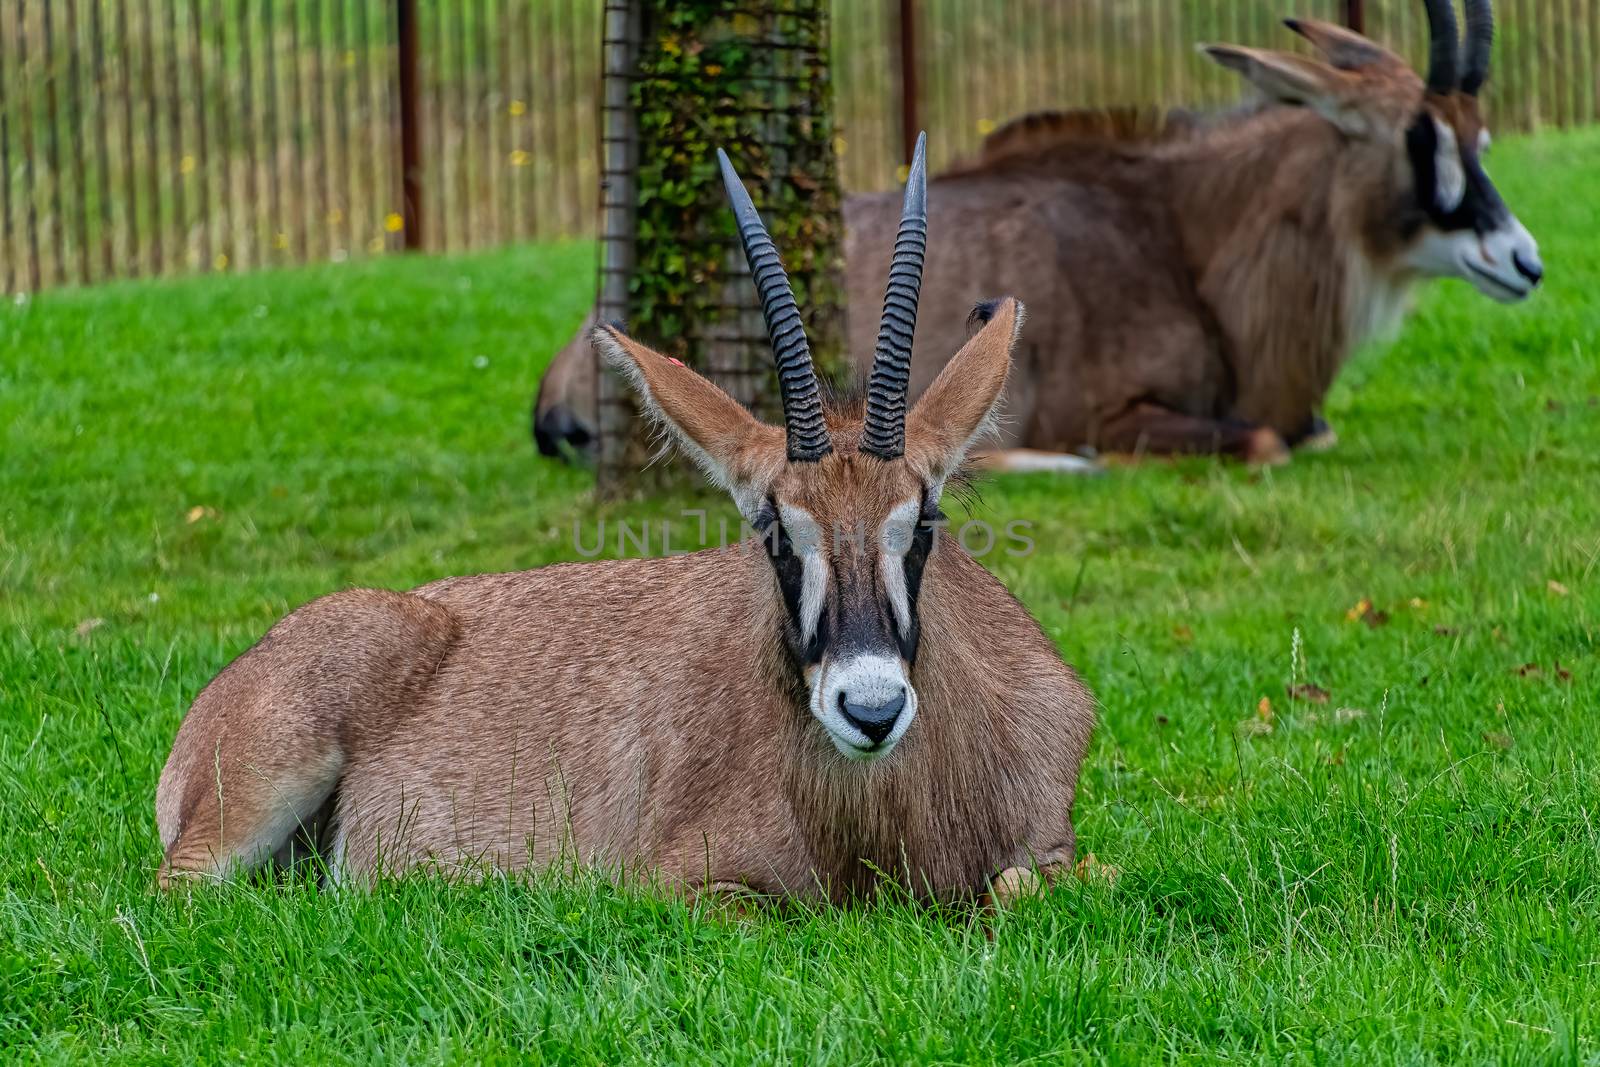 Roan Antelope laying down on some grass